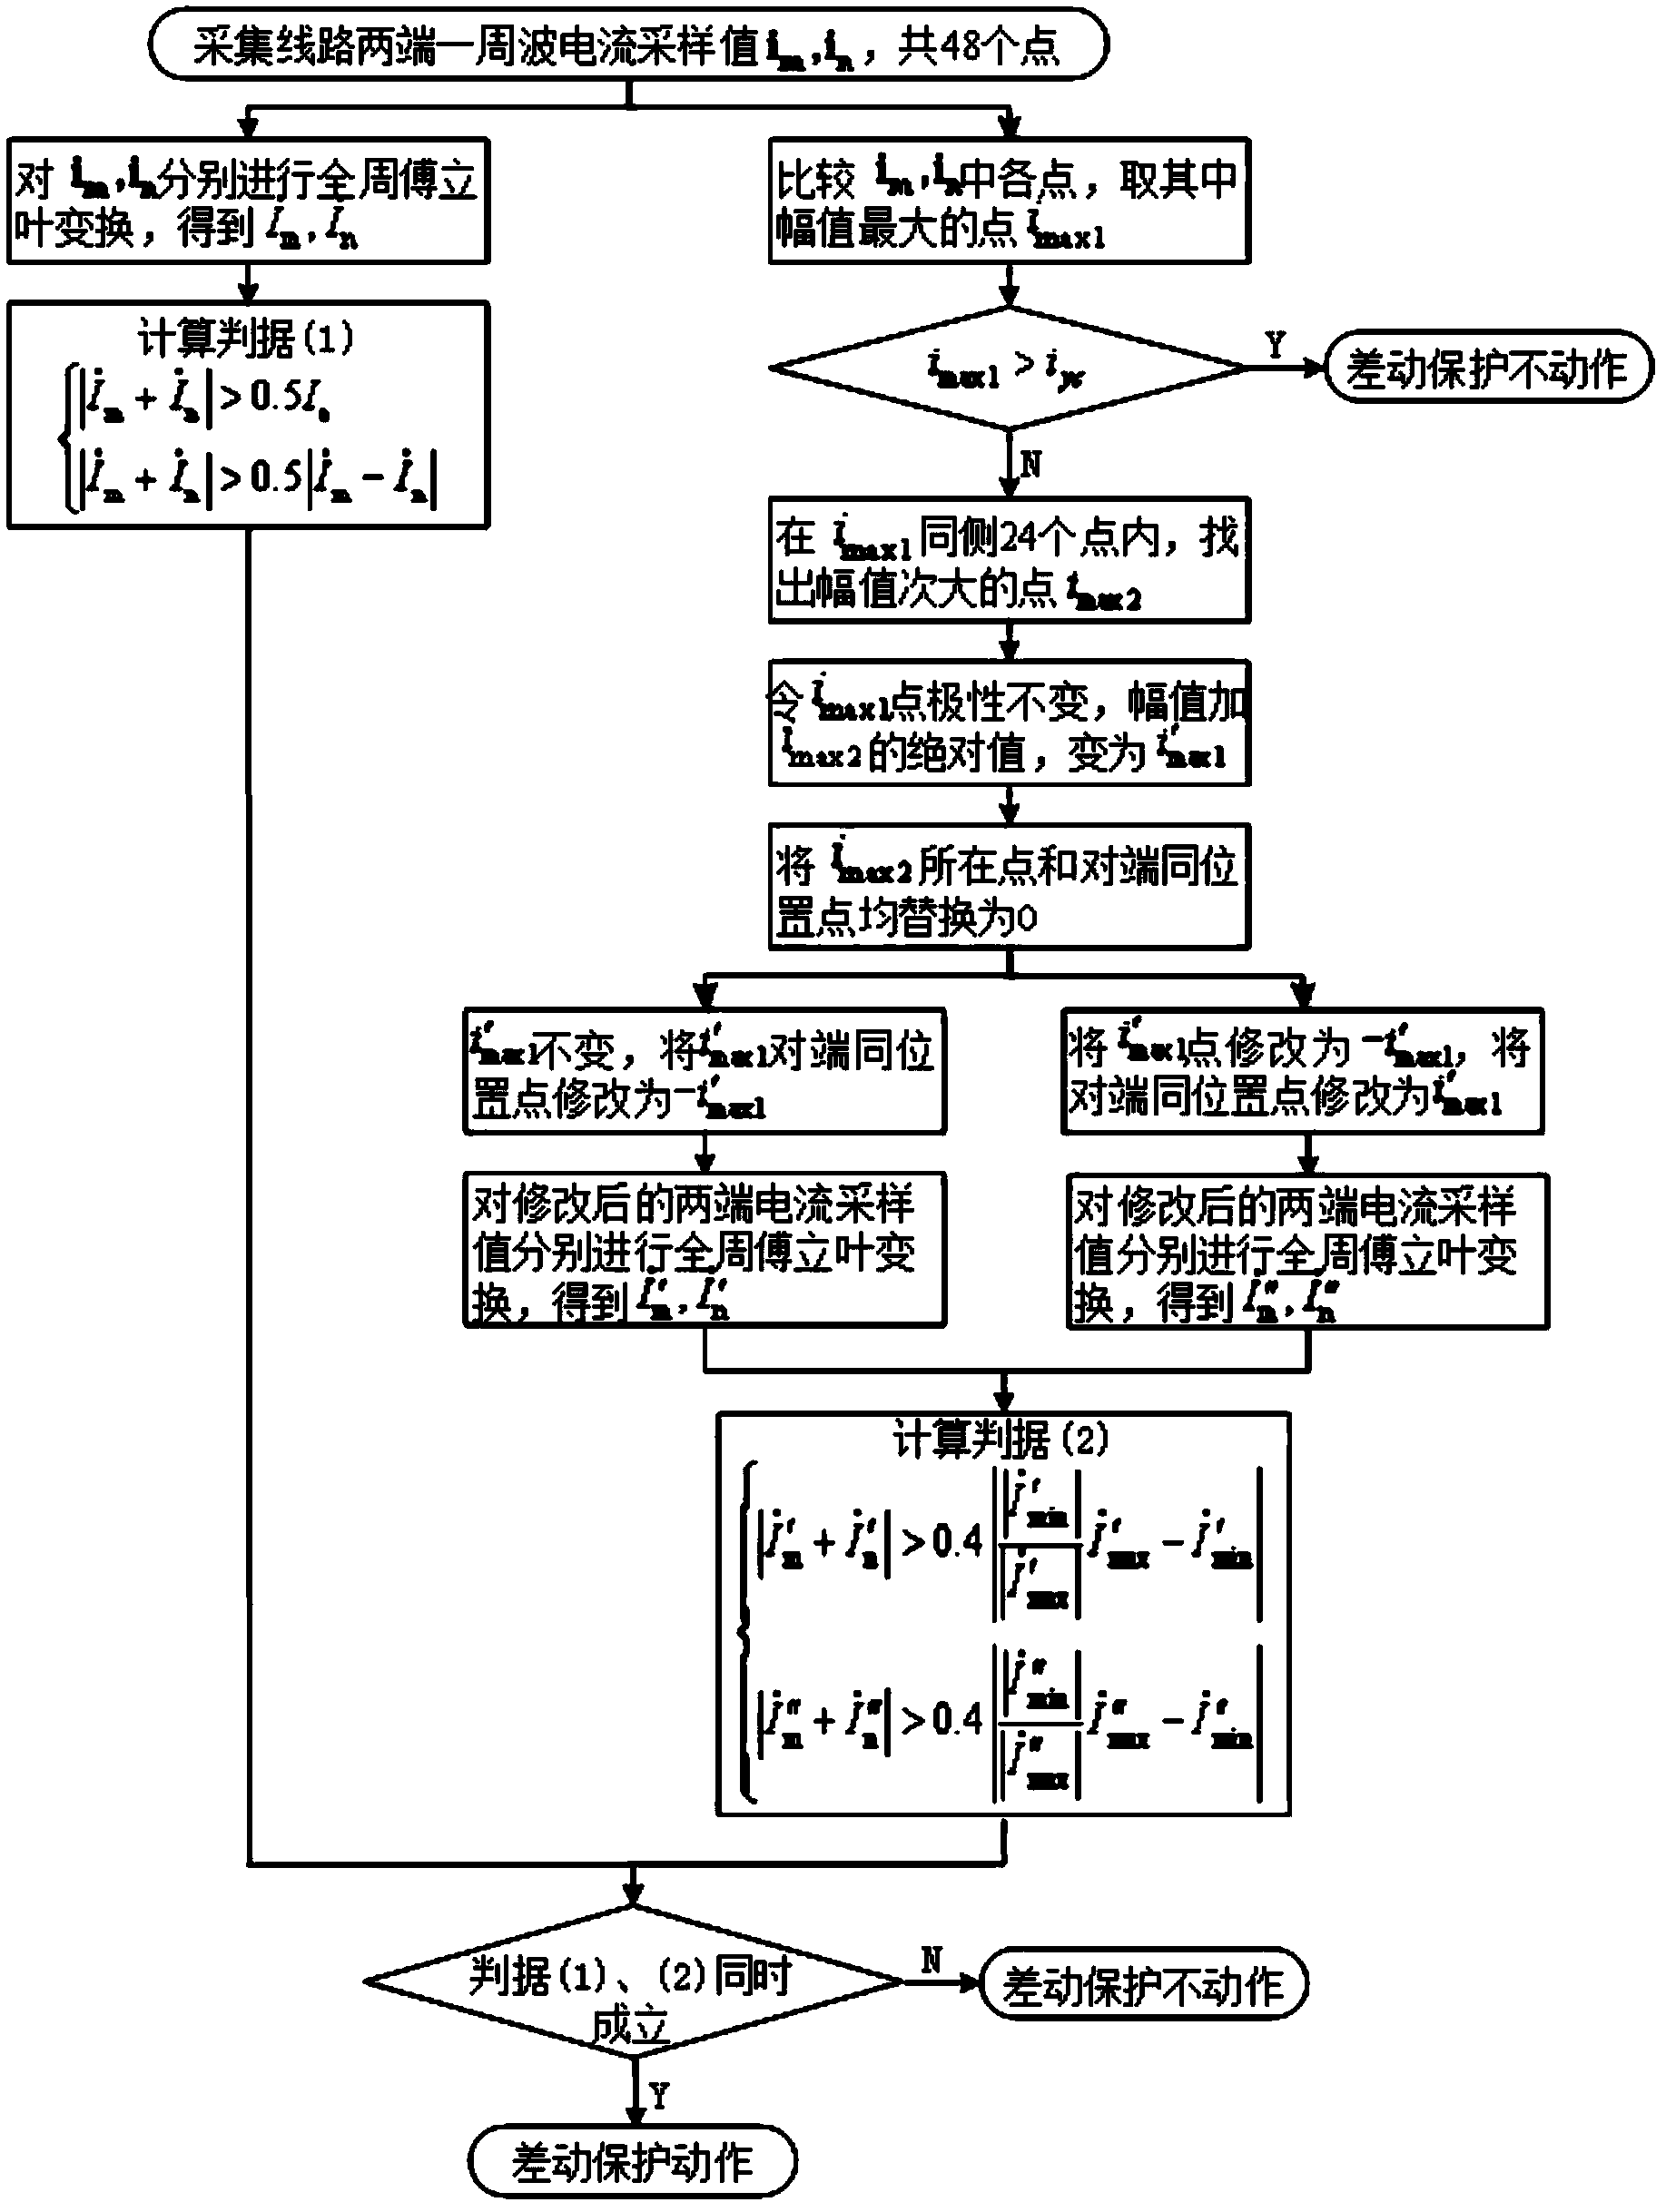 Circuit current differential protection method preventing abnormal large number of combination unit